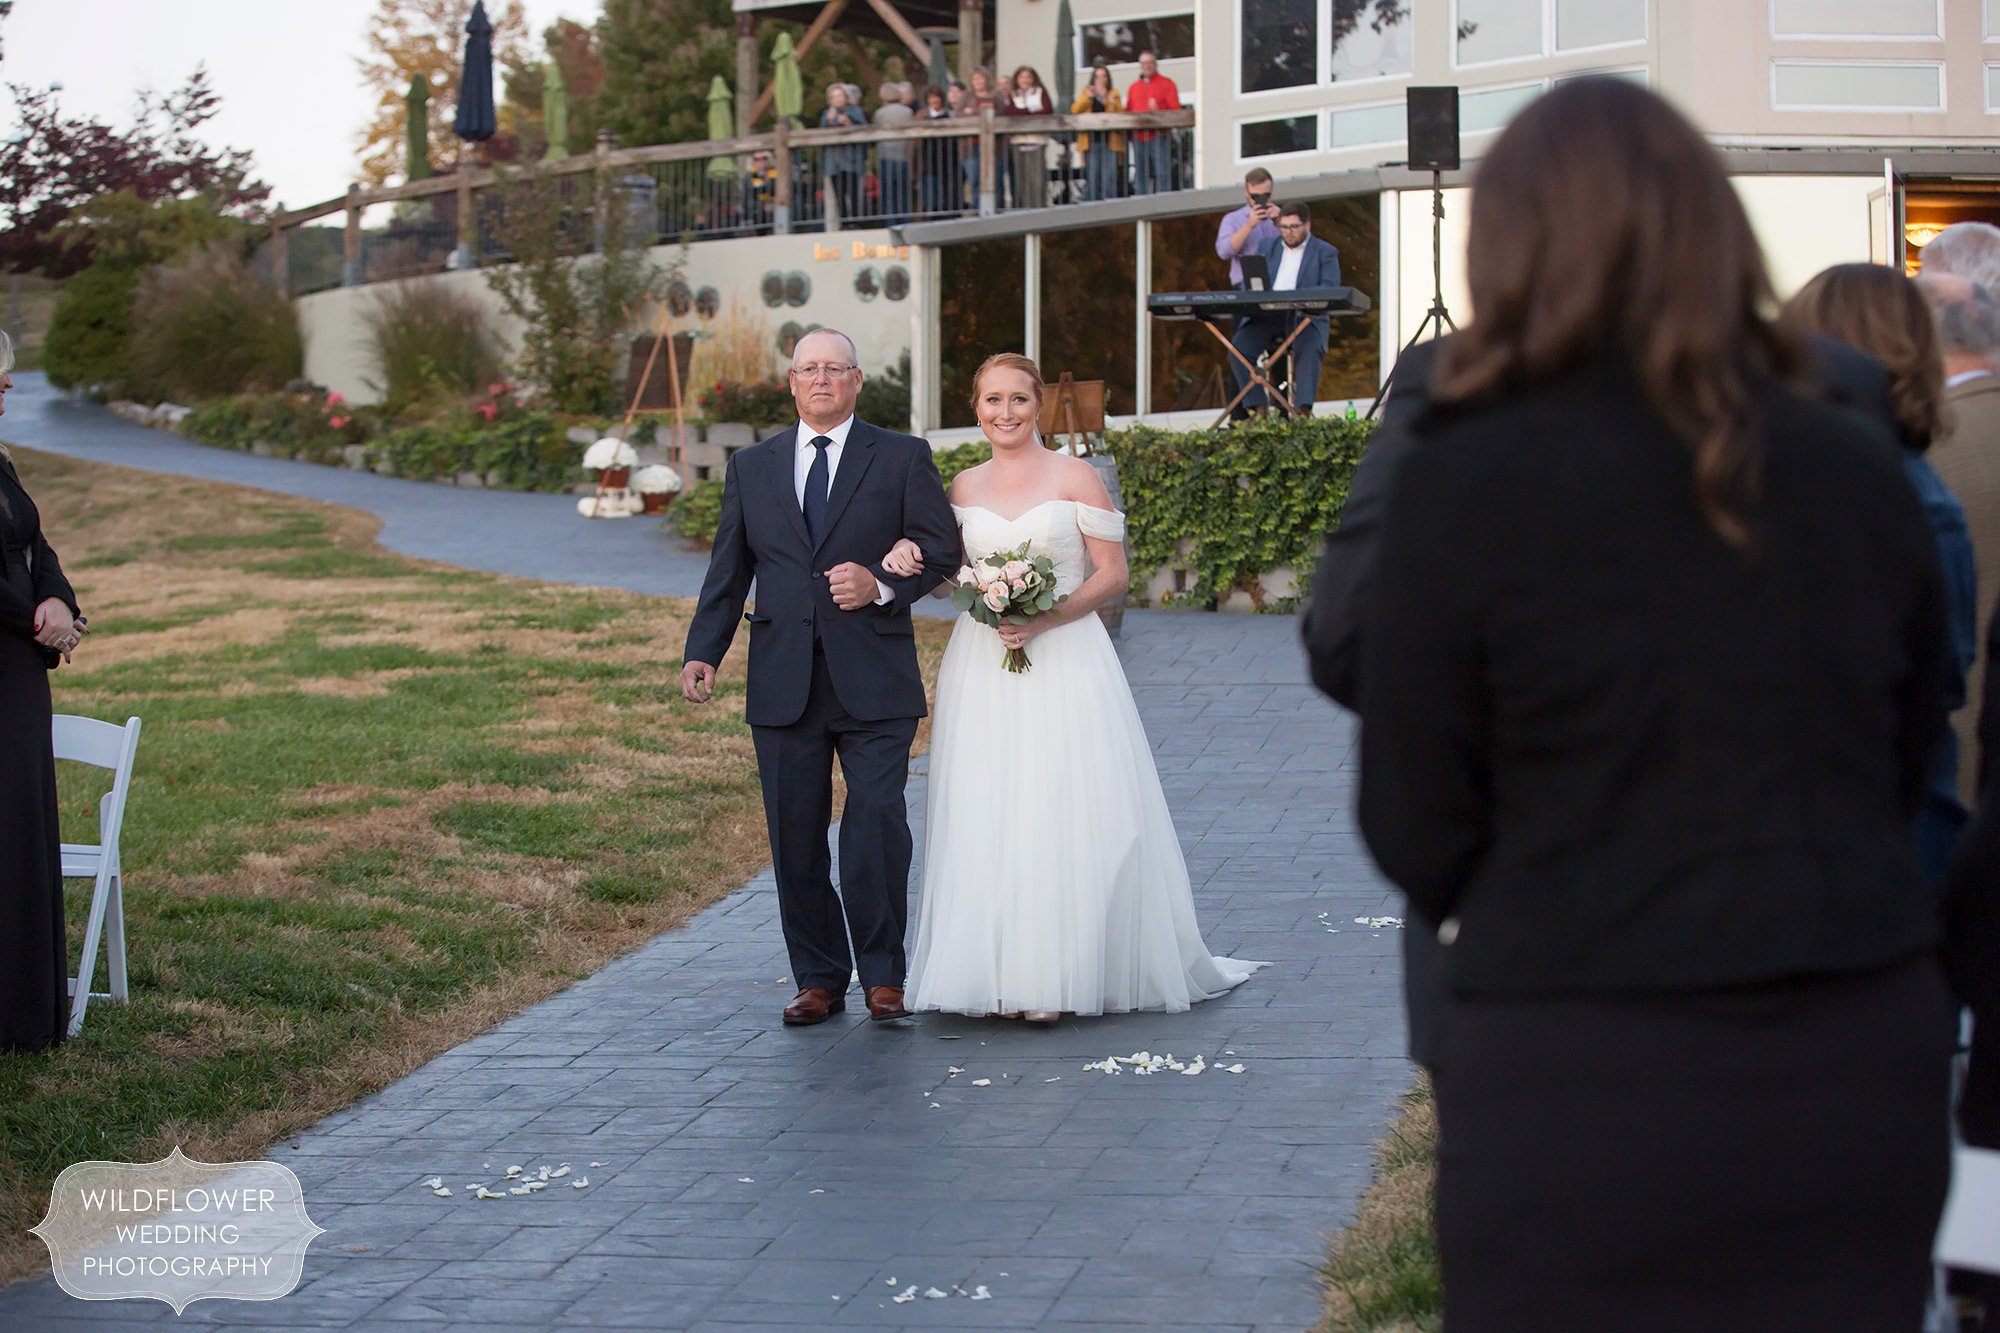 The bride and her father walk into the outdoor ceremony at Les Bourgeois Winery.